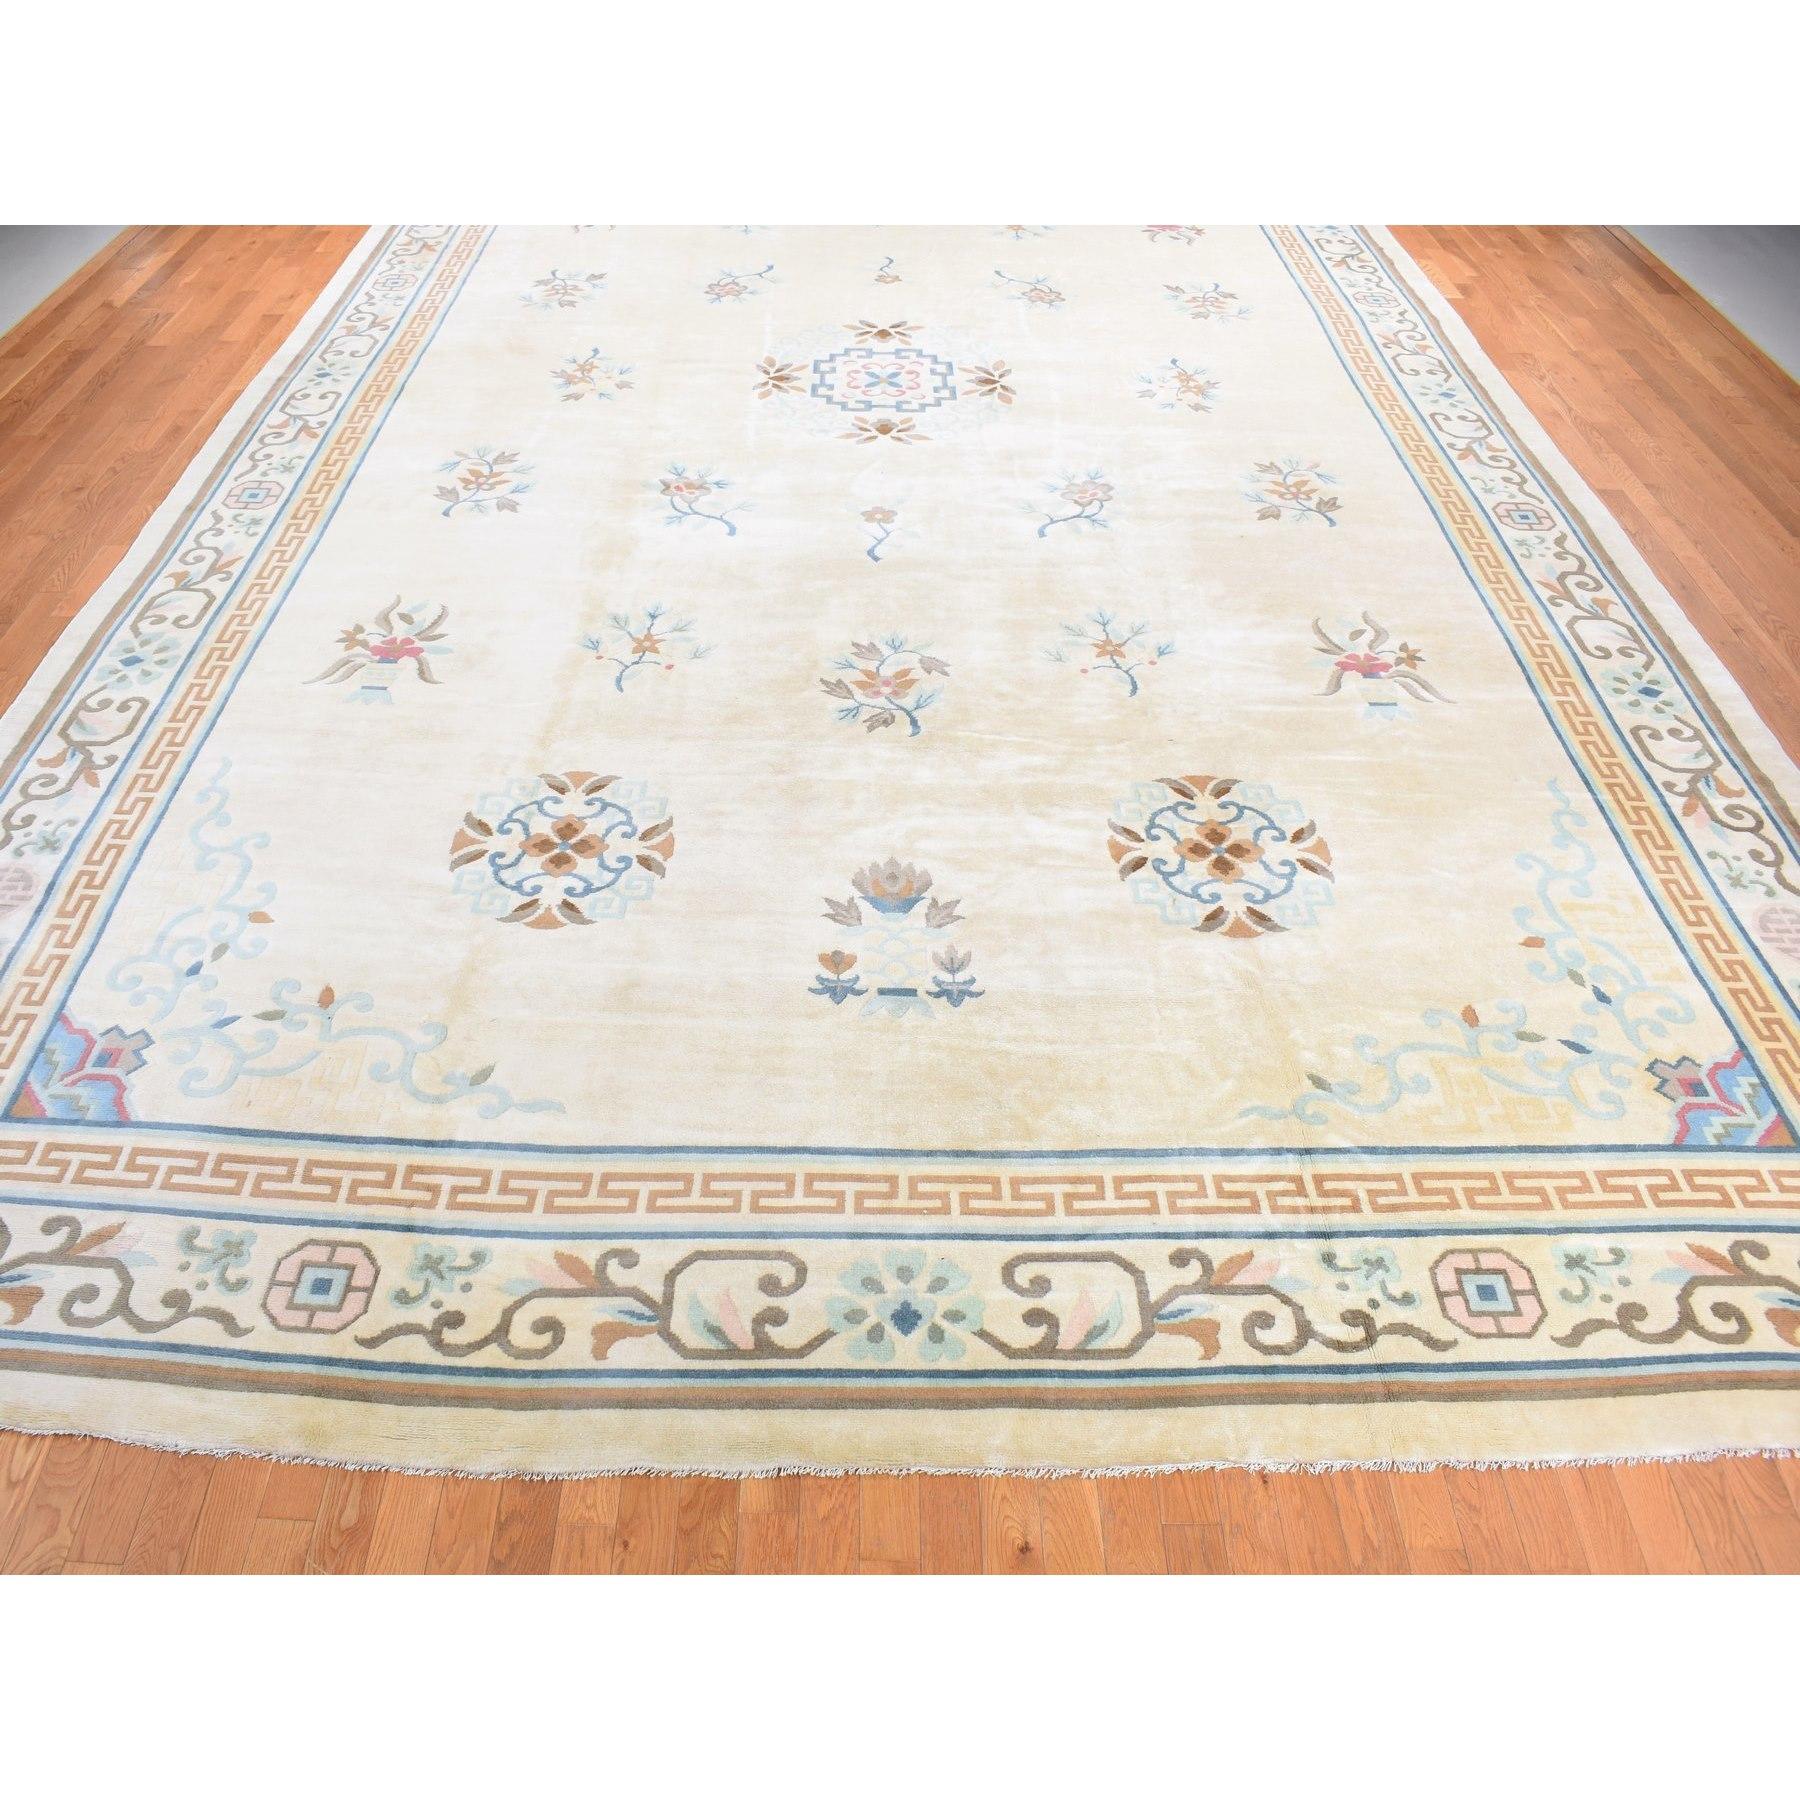 This fabulous hand-knotted carpet has been created and designed for extra strength and durability. This rug has been handcrafted for weeks in the traditional method that is used to make
Exact Rug Size in Feet and Inches : 13'9